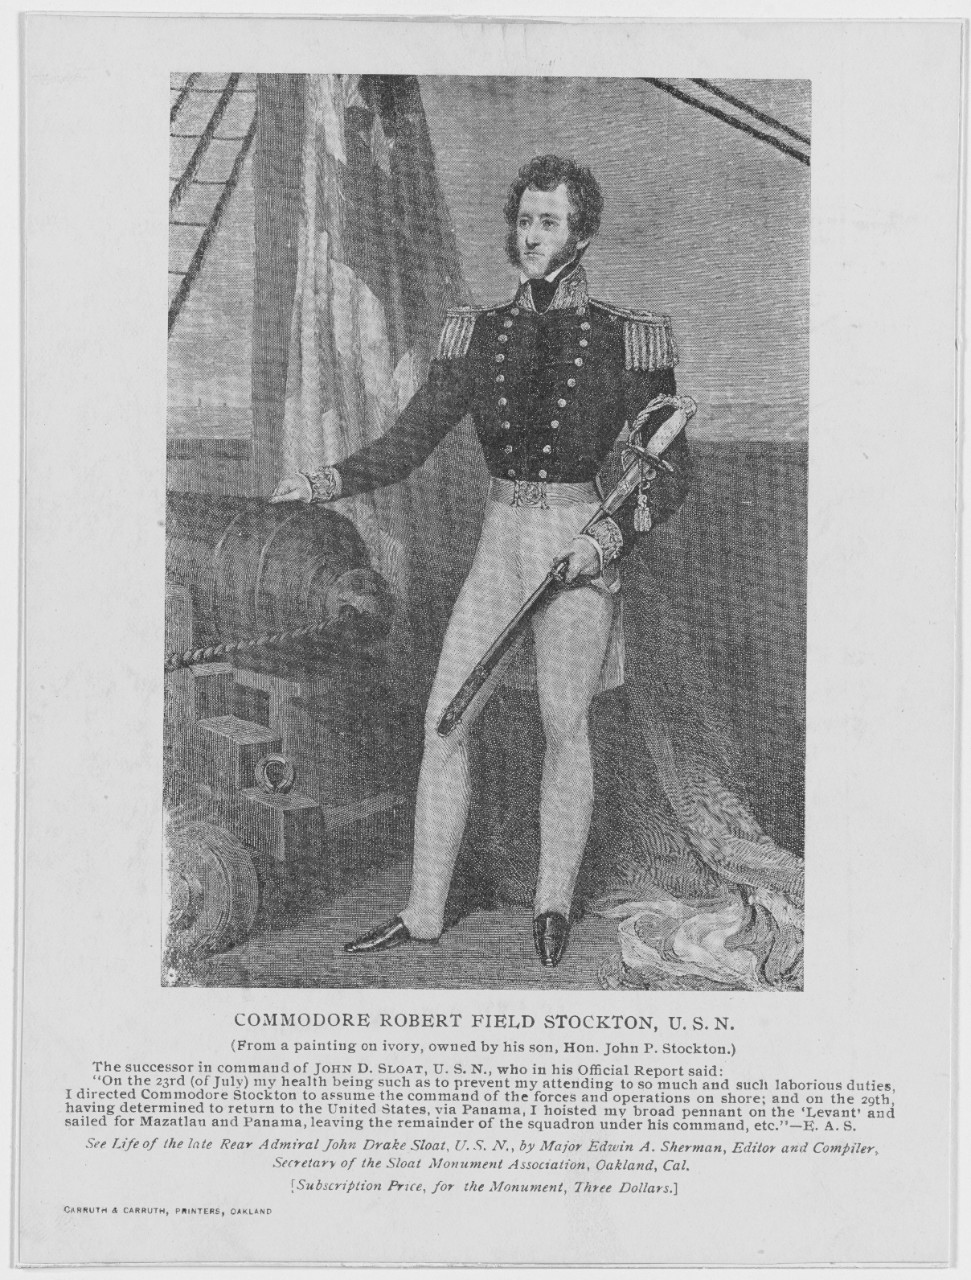 Halftone reproduction of a 19th Century engraving, printed by Carruth & Carruth, Oakland, California, for the Sloat Memorial Association of Oakland. The original engraving was based on a painting on ivory owned by Commodore Stockton's son, the Hon. John P. Stockton. Stockton relieved Commodore John D. Sloat as commander of the Pacific Squadron in July 1847.